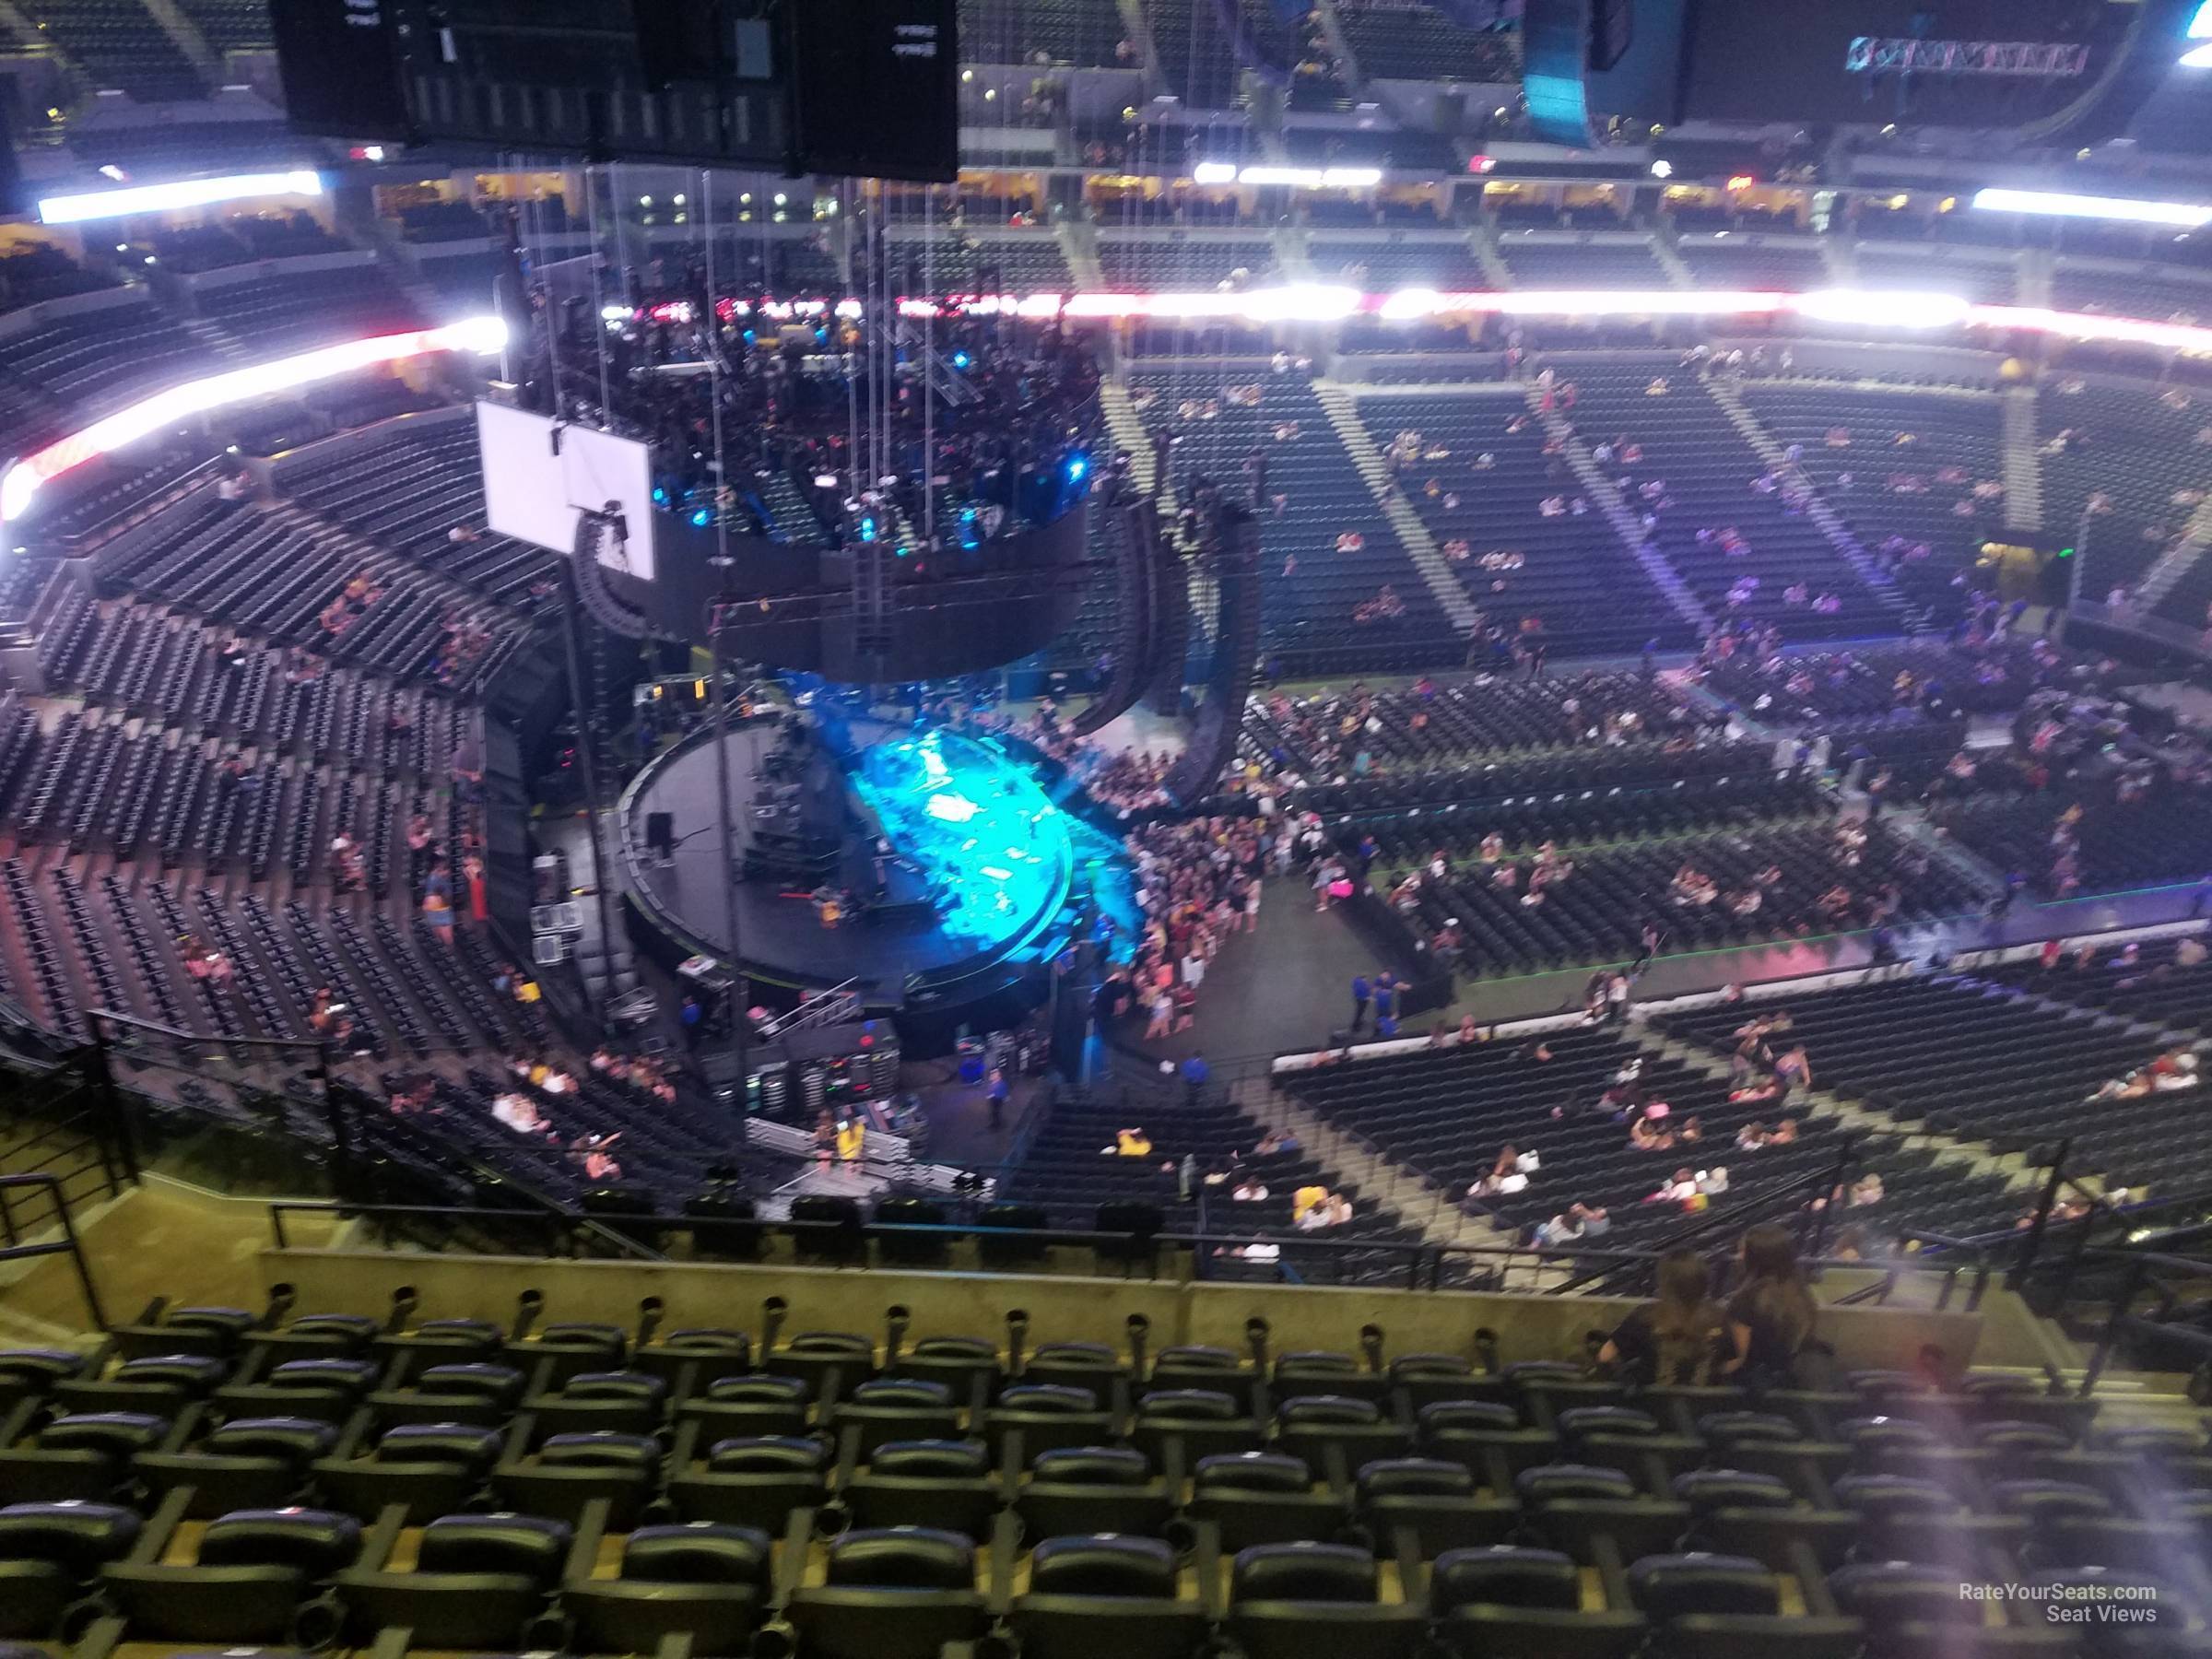 section 350, row 13 seat view  for concert - ball arena